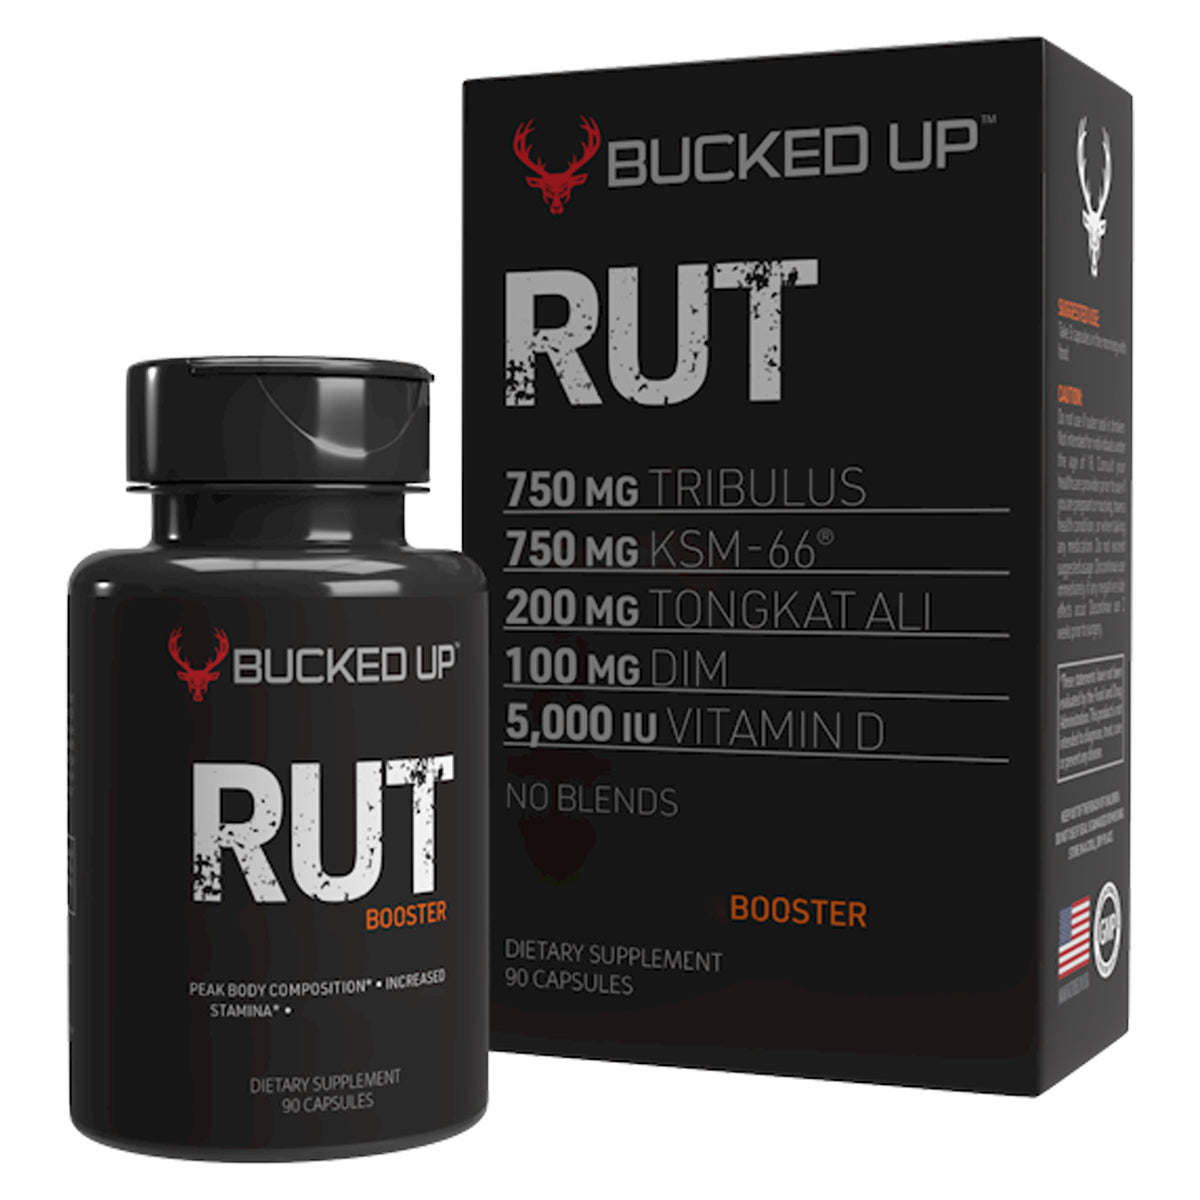 Bucked Up Rut Booster in  by GOHUNT | Bucked Up - GOHUNT Shop